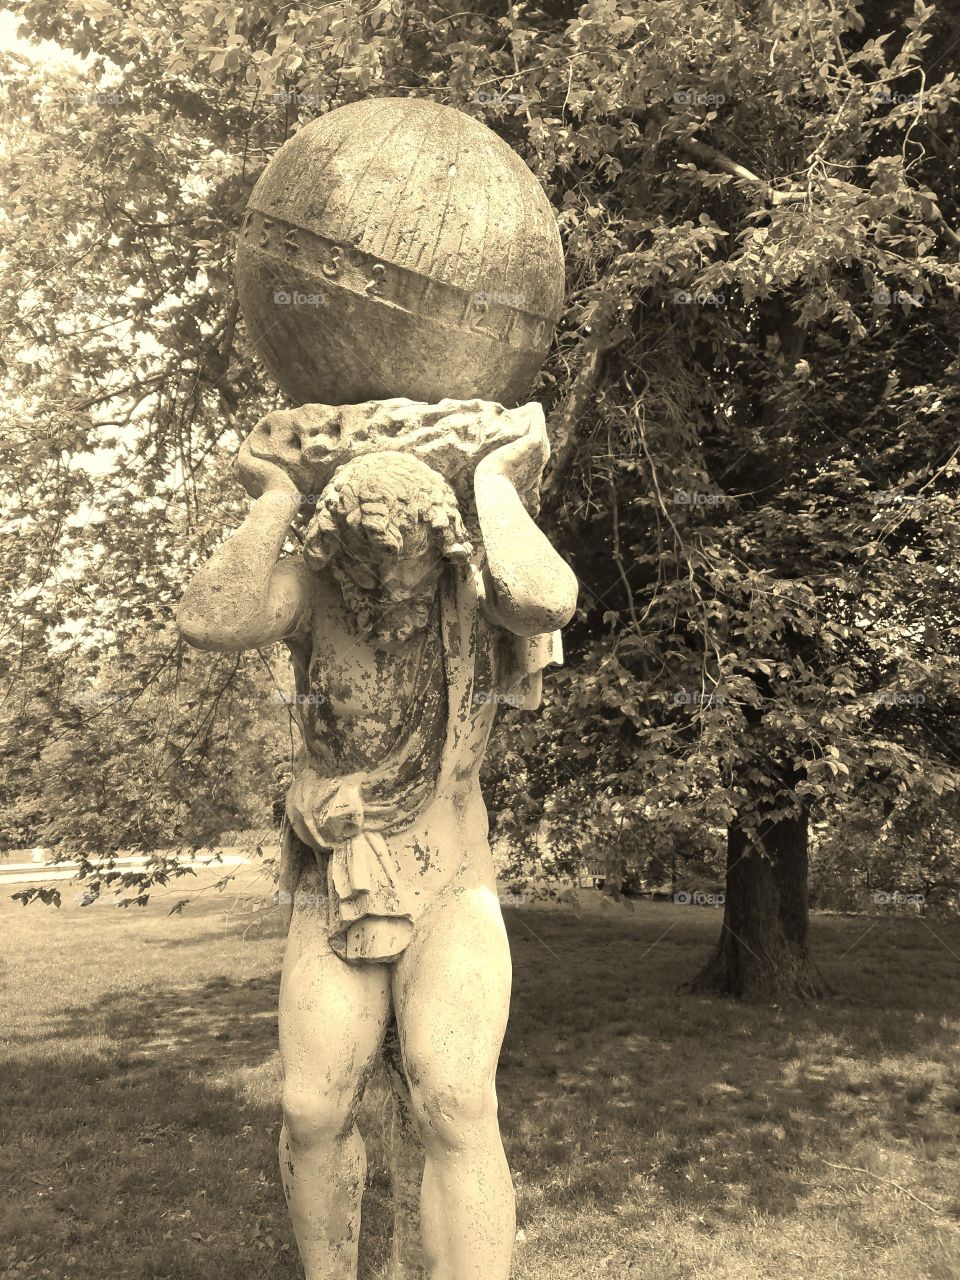 Beginning of Summer at Old Westbury Gardens on Long Island. Mix of Clouds and Sun. Sepia Filter. Sculpture Captured on Android Phone - Galaxy S7. May 2017.